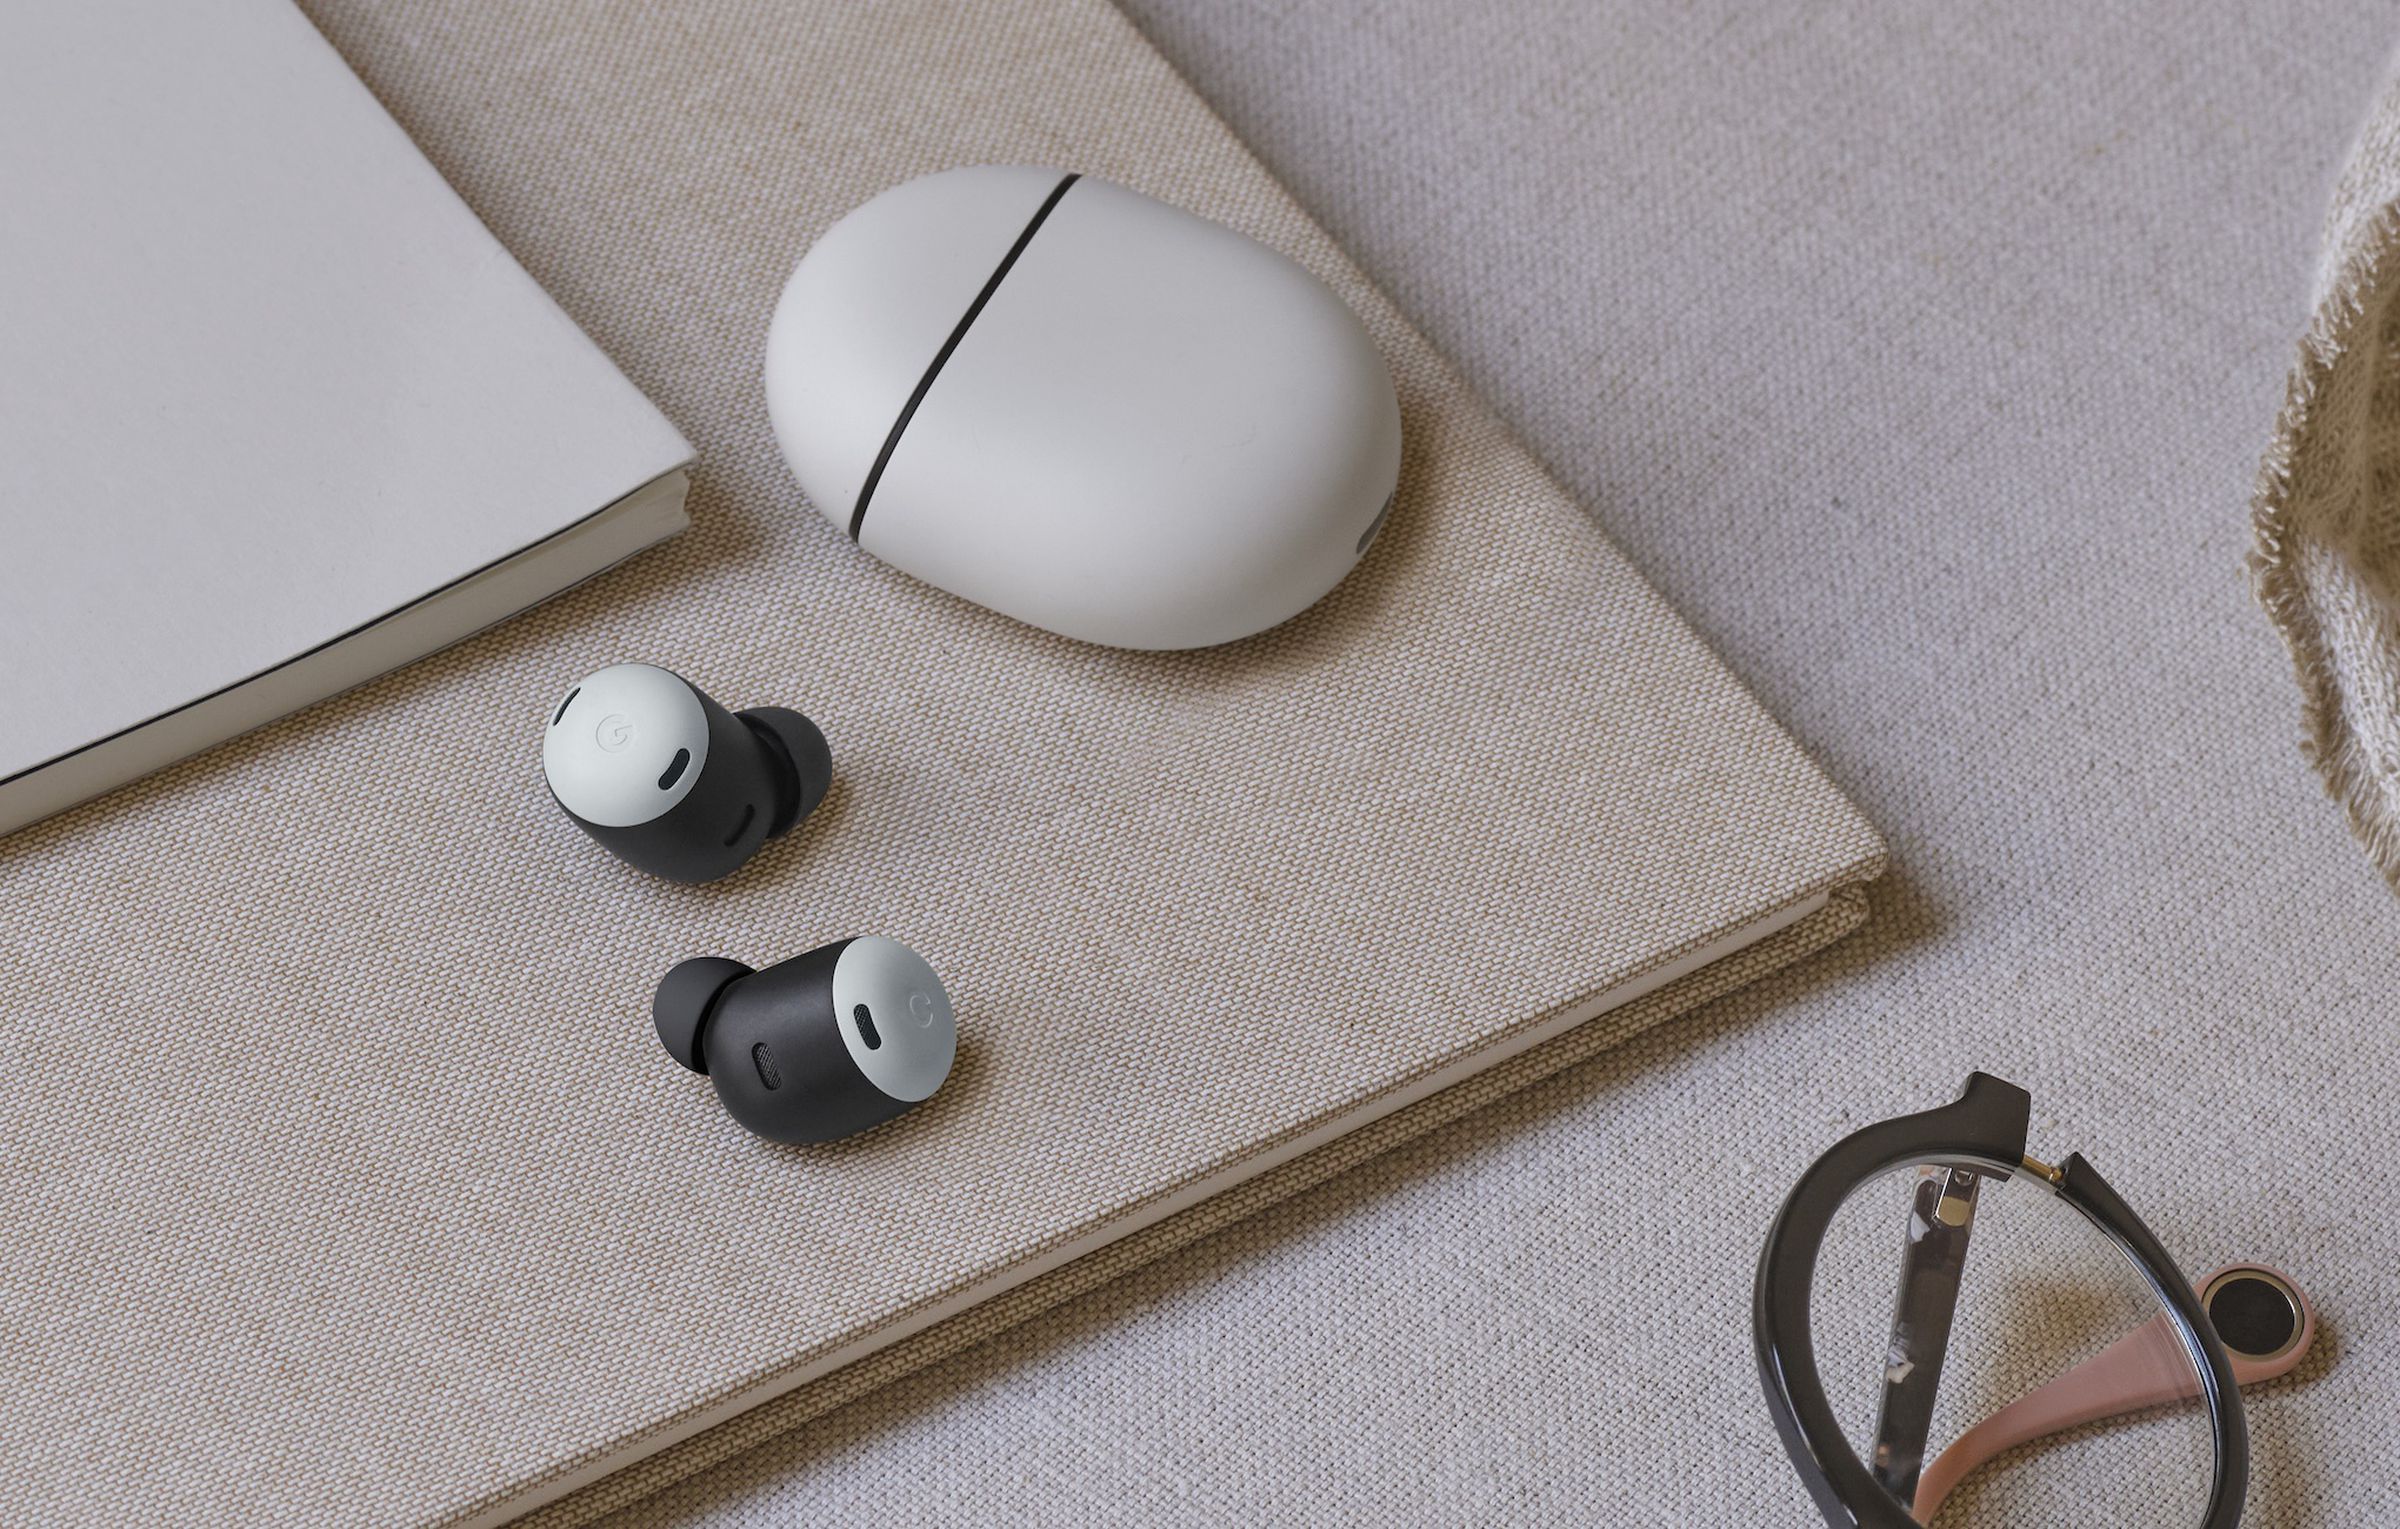 The Pixel Buds Pro share the same design aesthetic as Google’s recent earbuds.